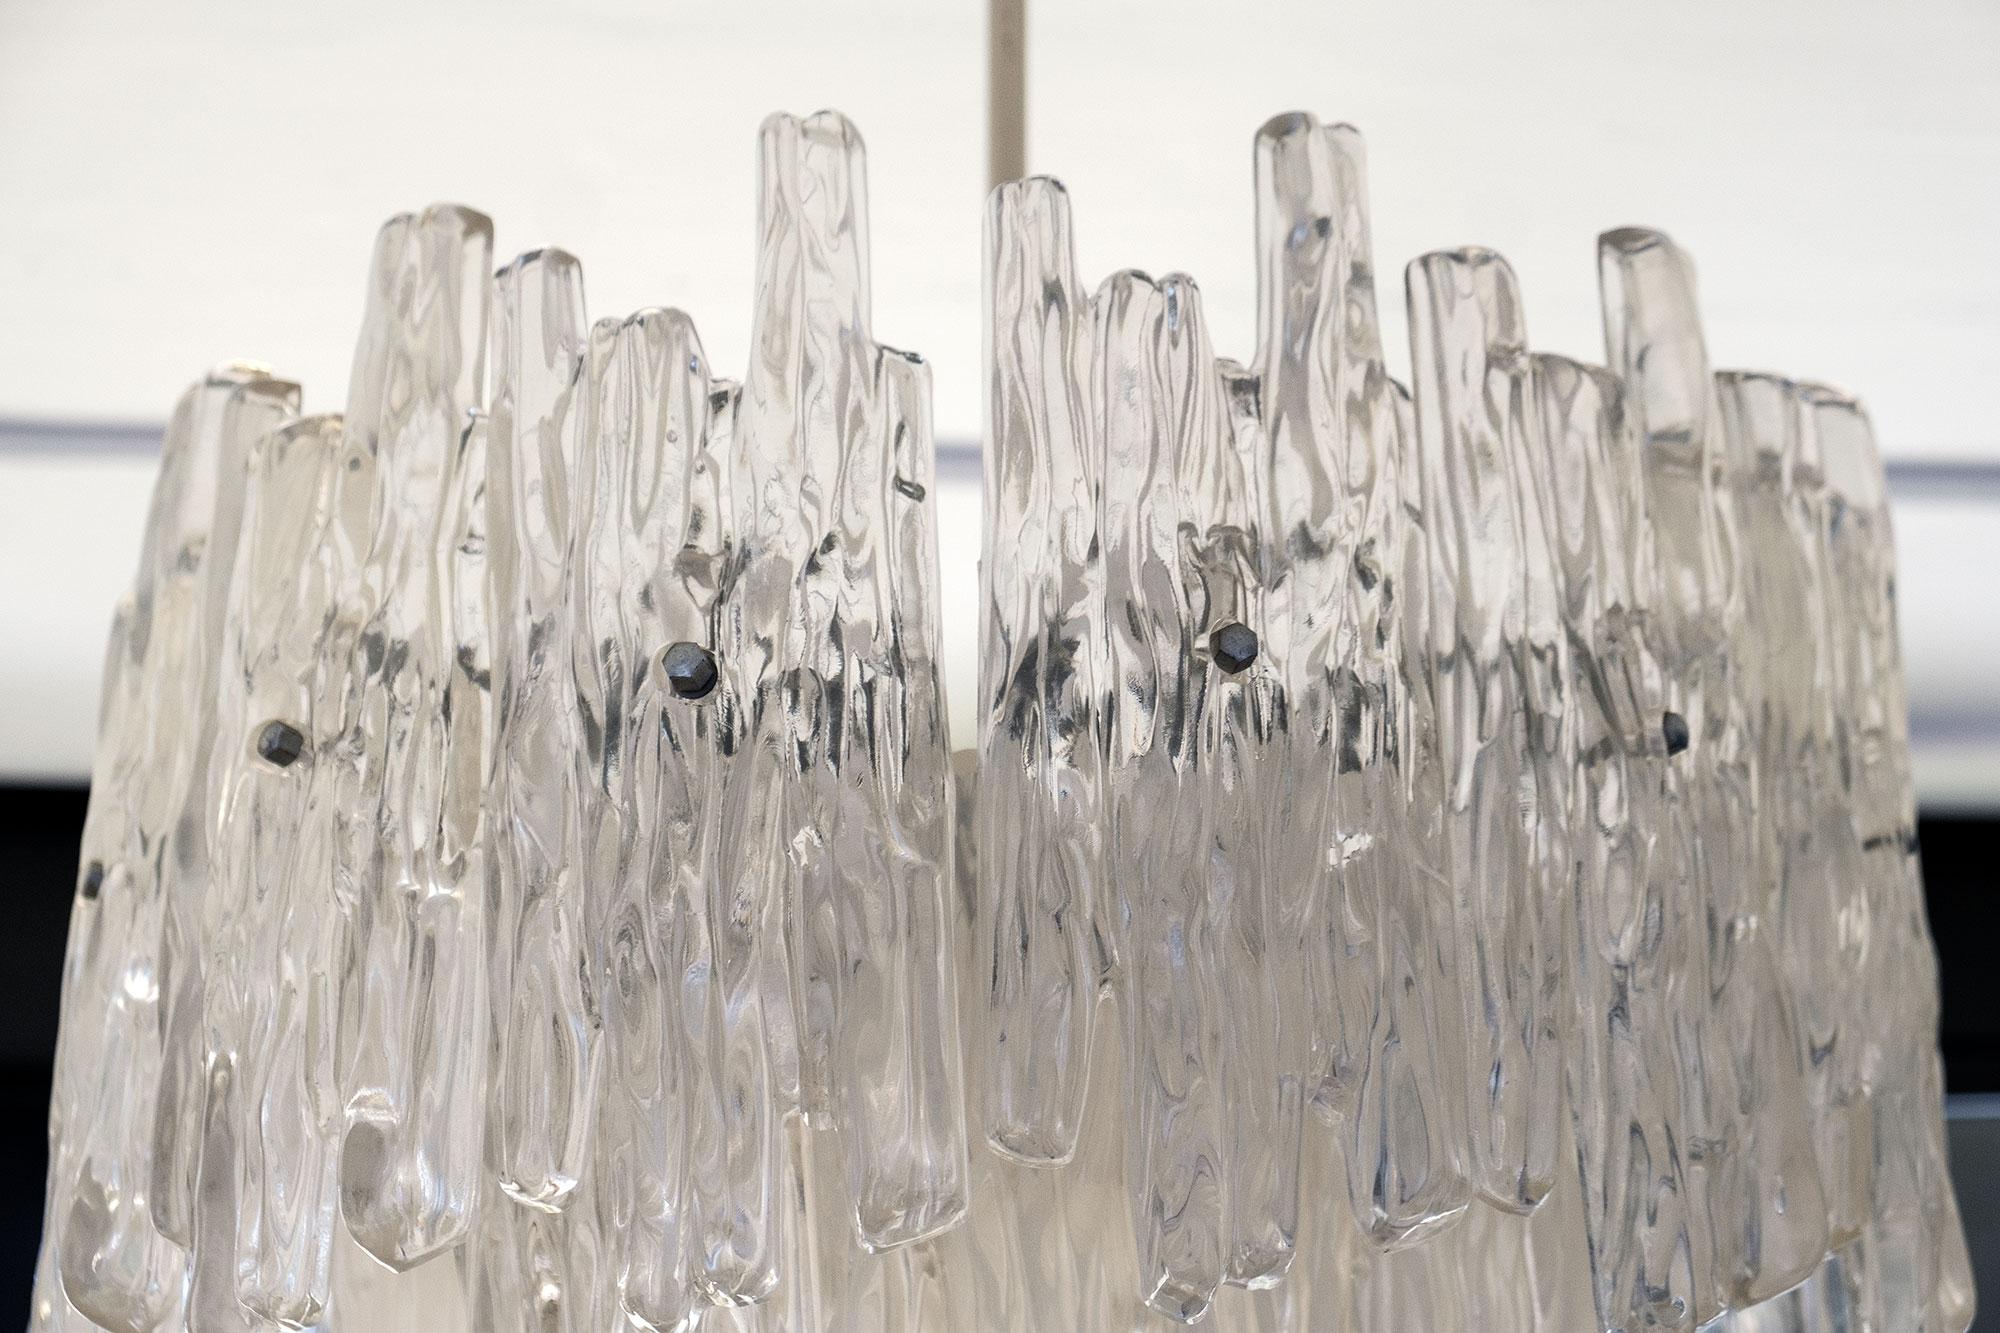 This stunning chandelier by Kinkeldey is crafted from brushed metal and lucite, formed to resemble haunting melting icicles. 
It gives a beautiful warm light an eye-catcher.